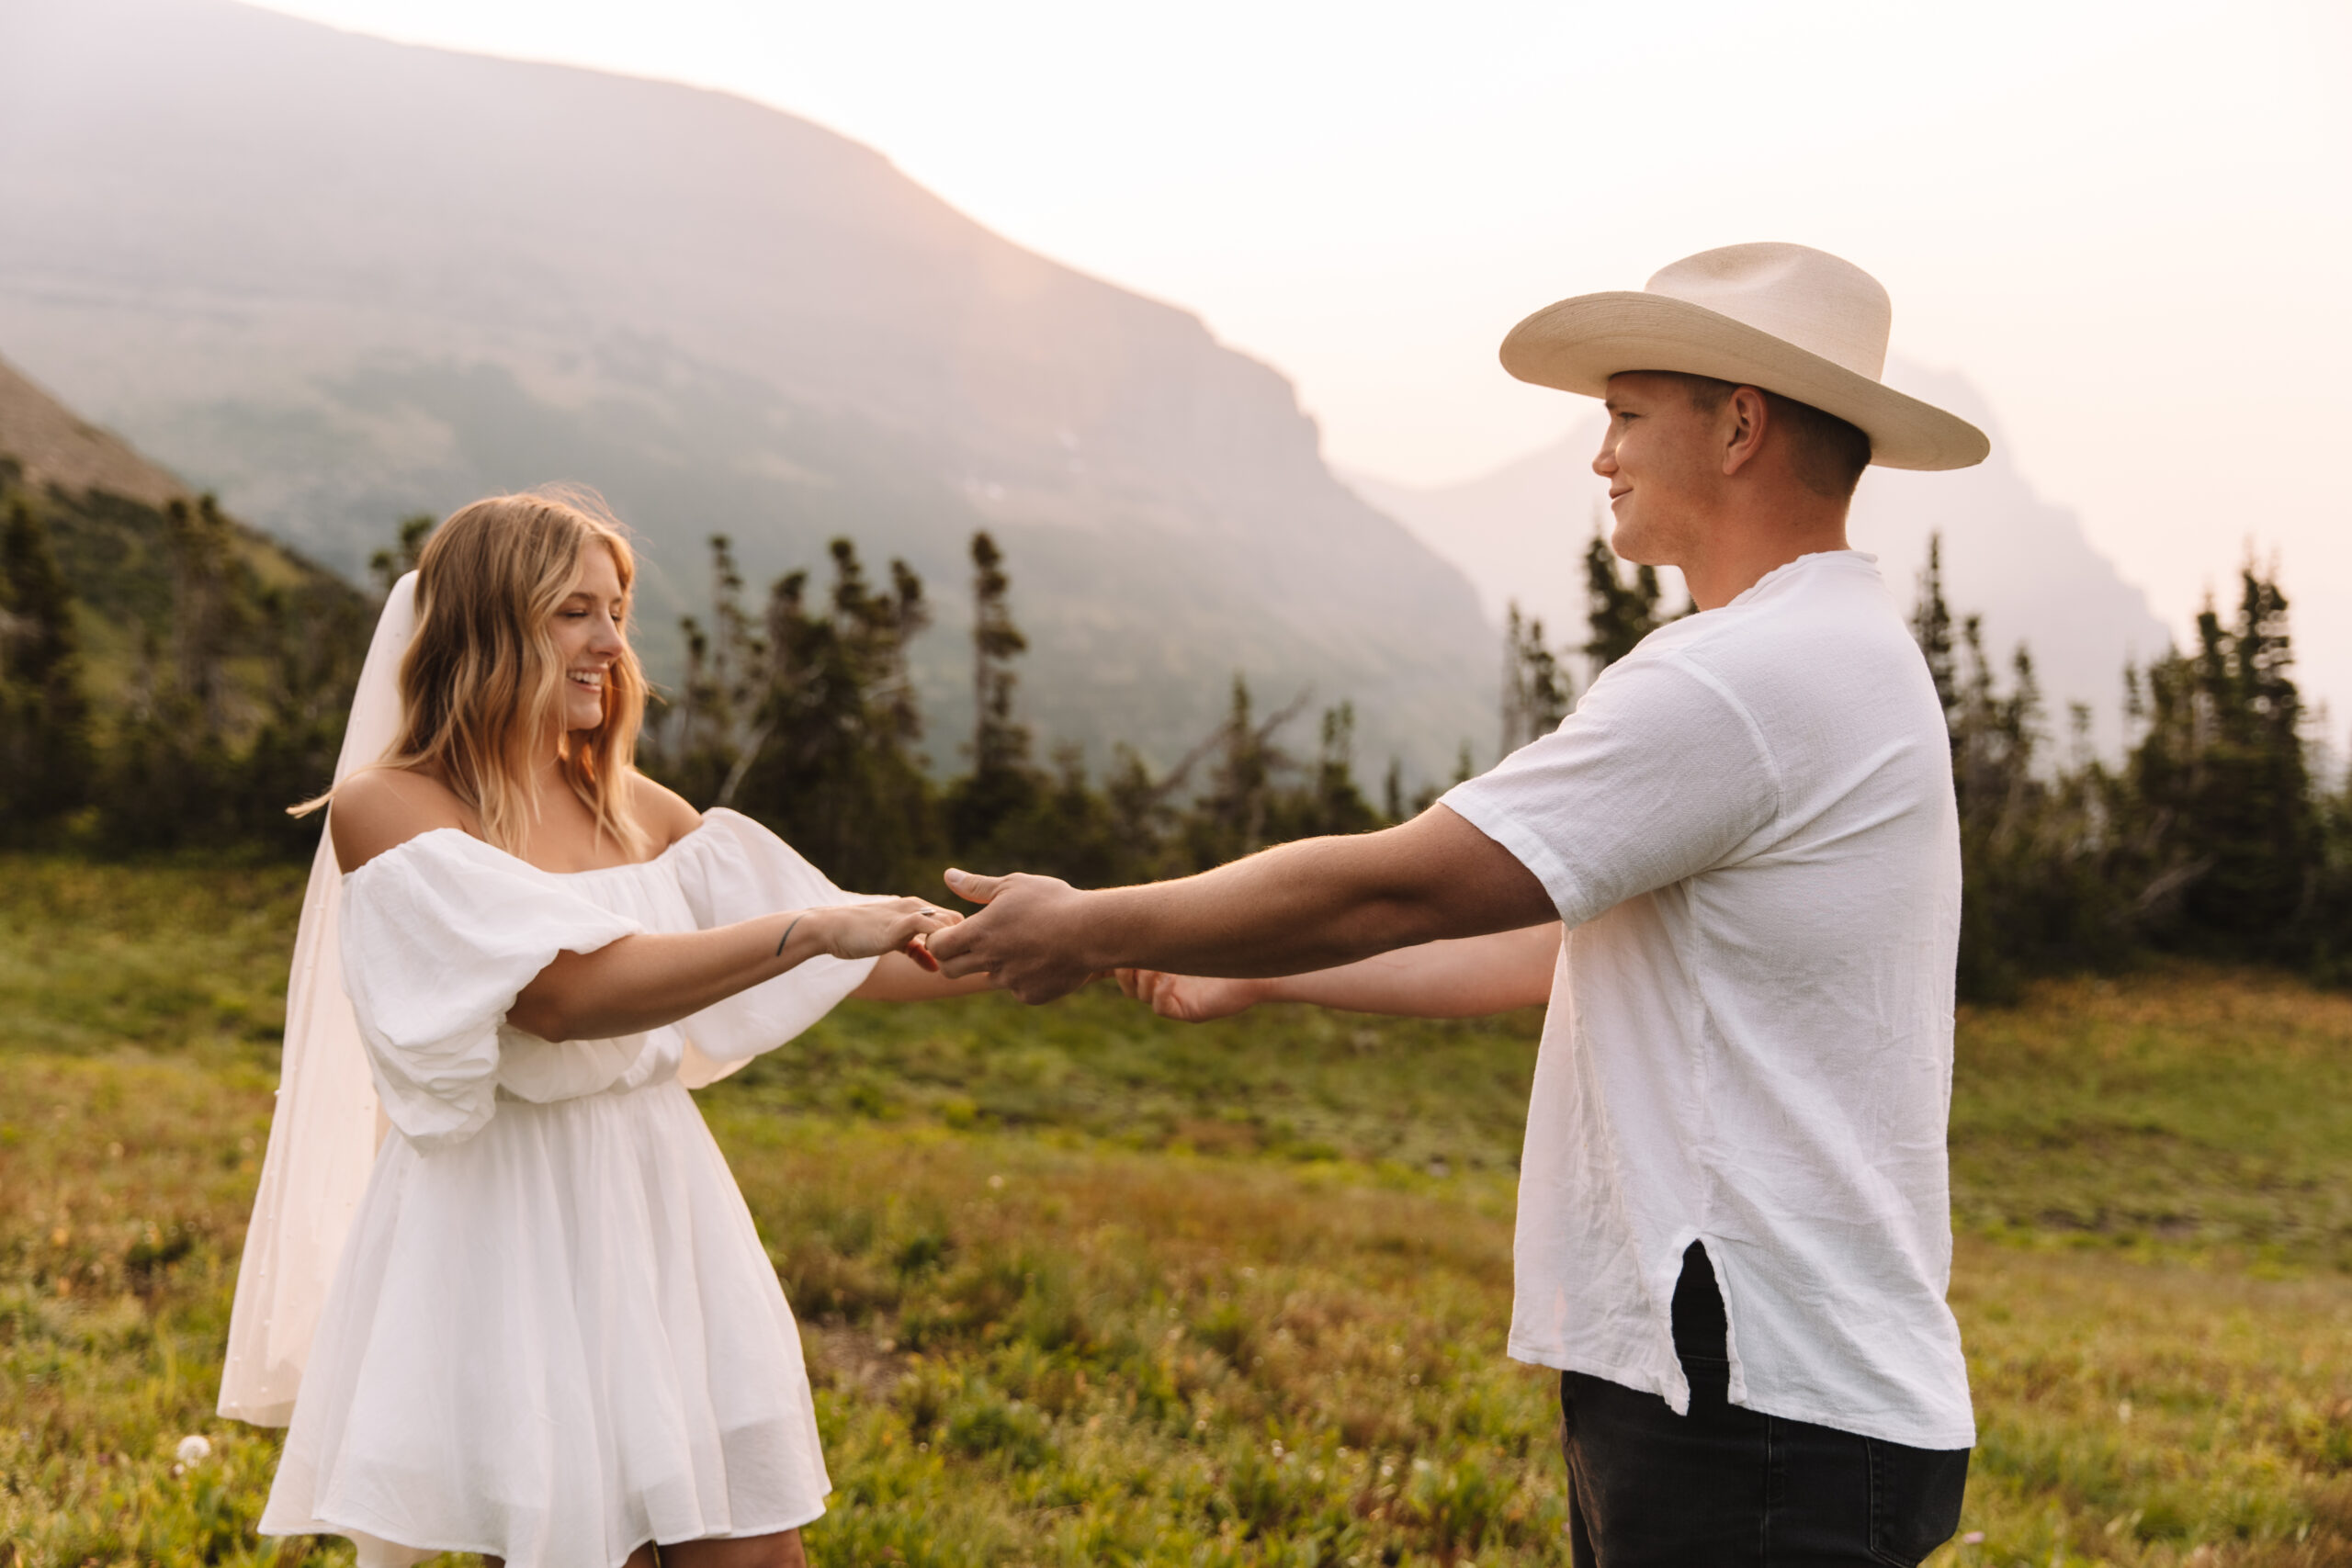 Groom seeing his bride for the first time, taking her hand and smiling at her in her short, flowing, white dress with mountains in the background